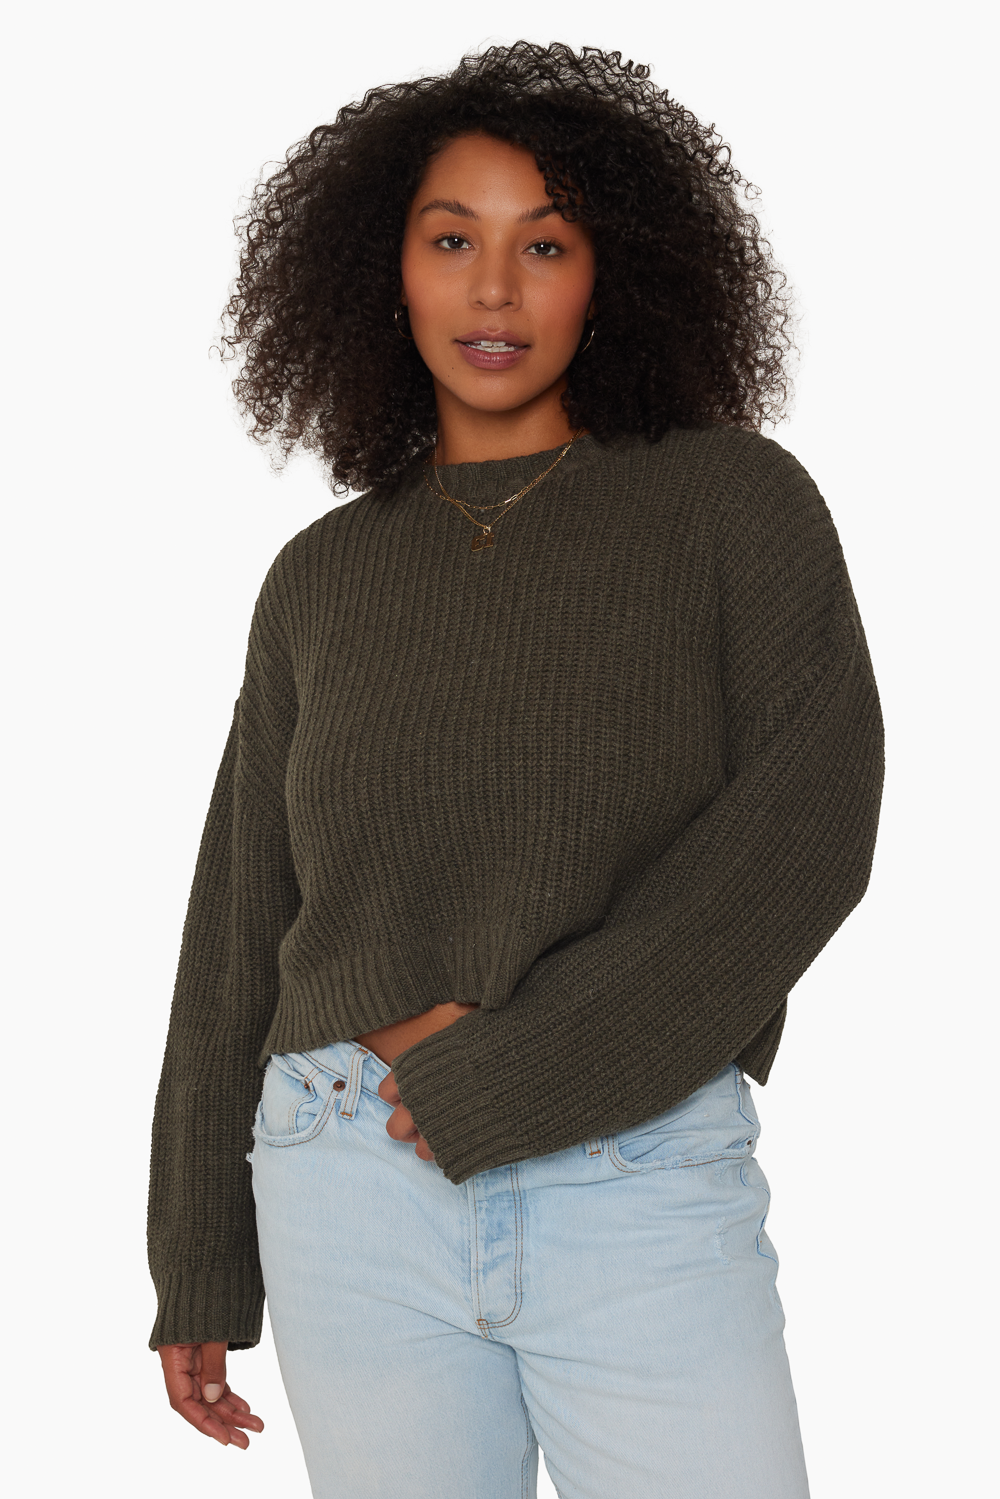 SET™ CROPPED CREWNECK IN SHADOW